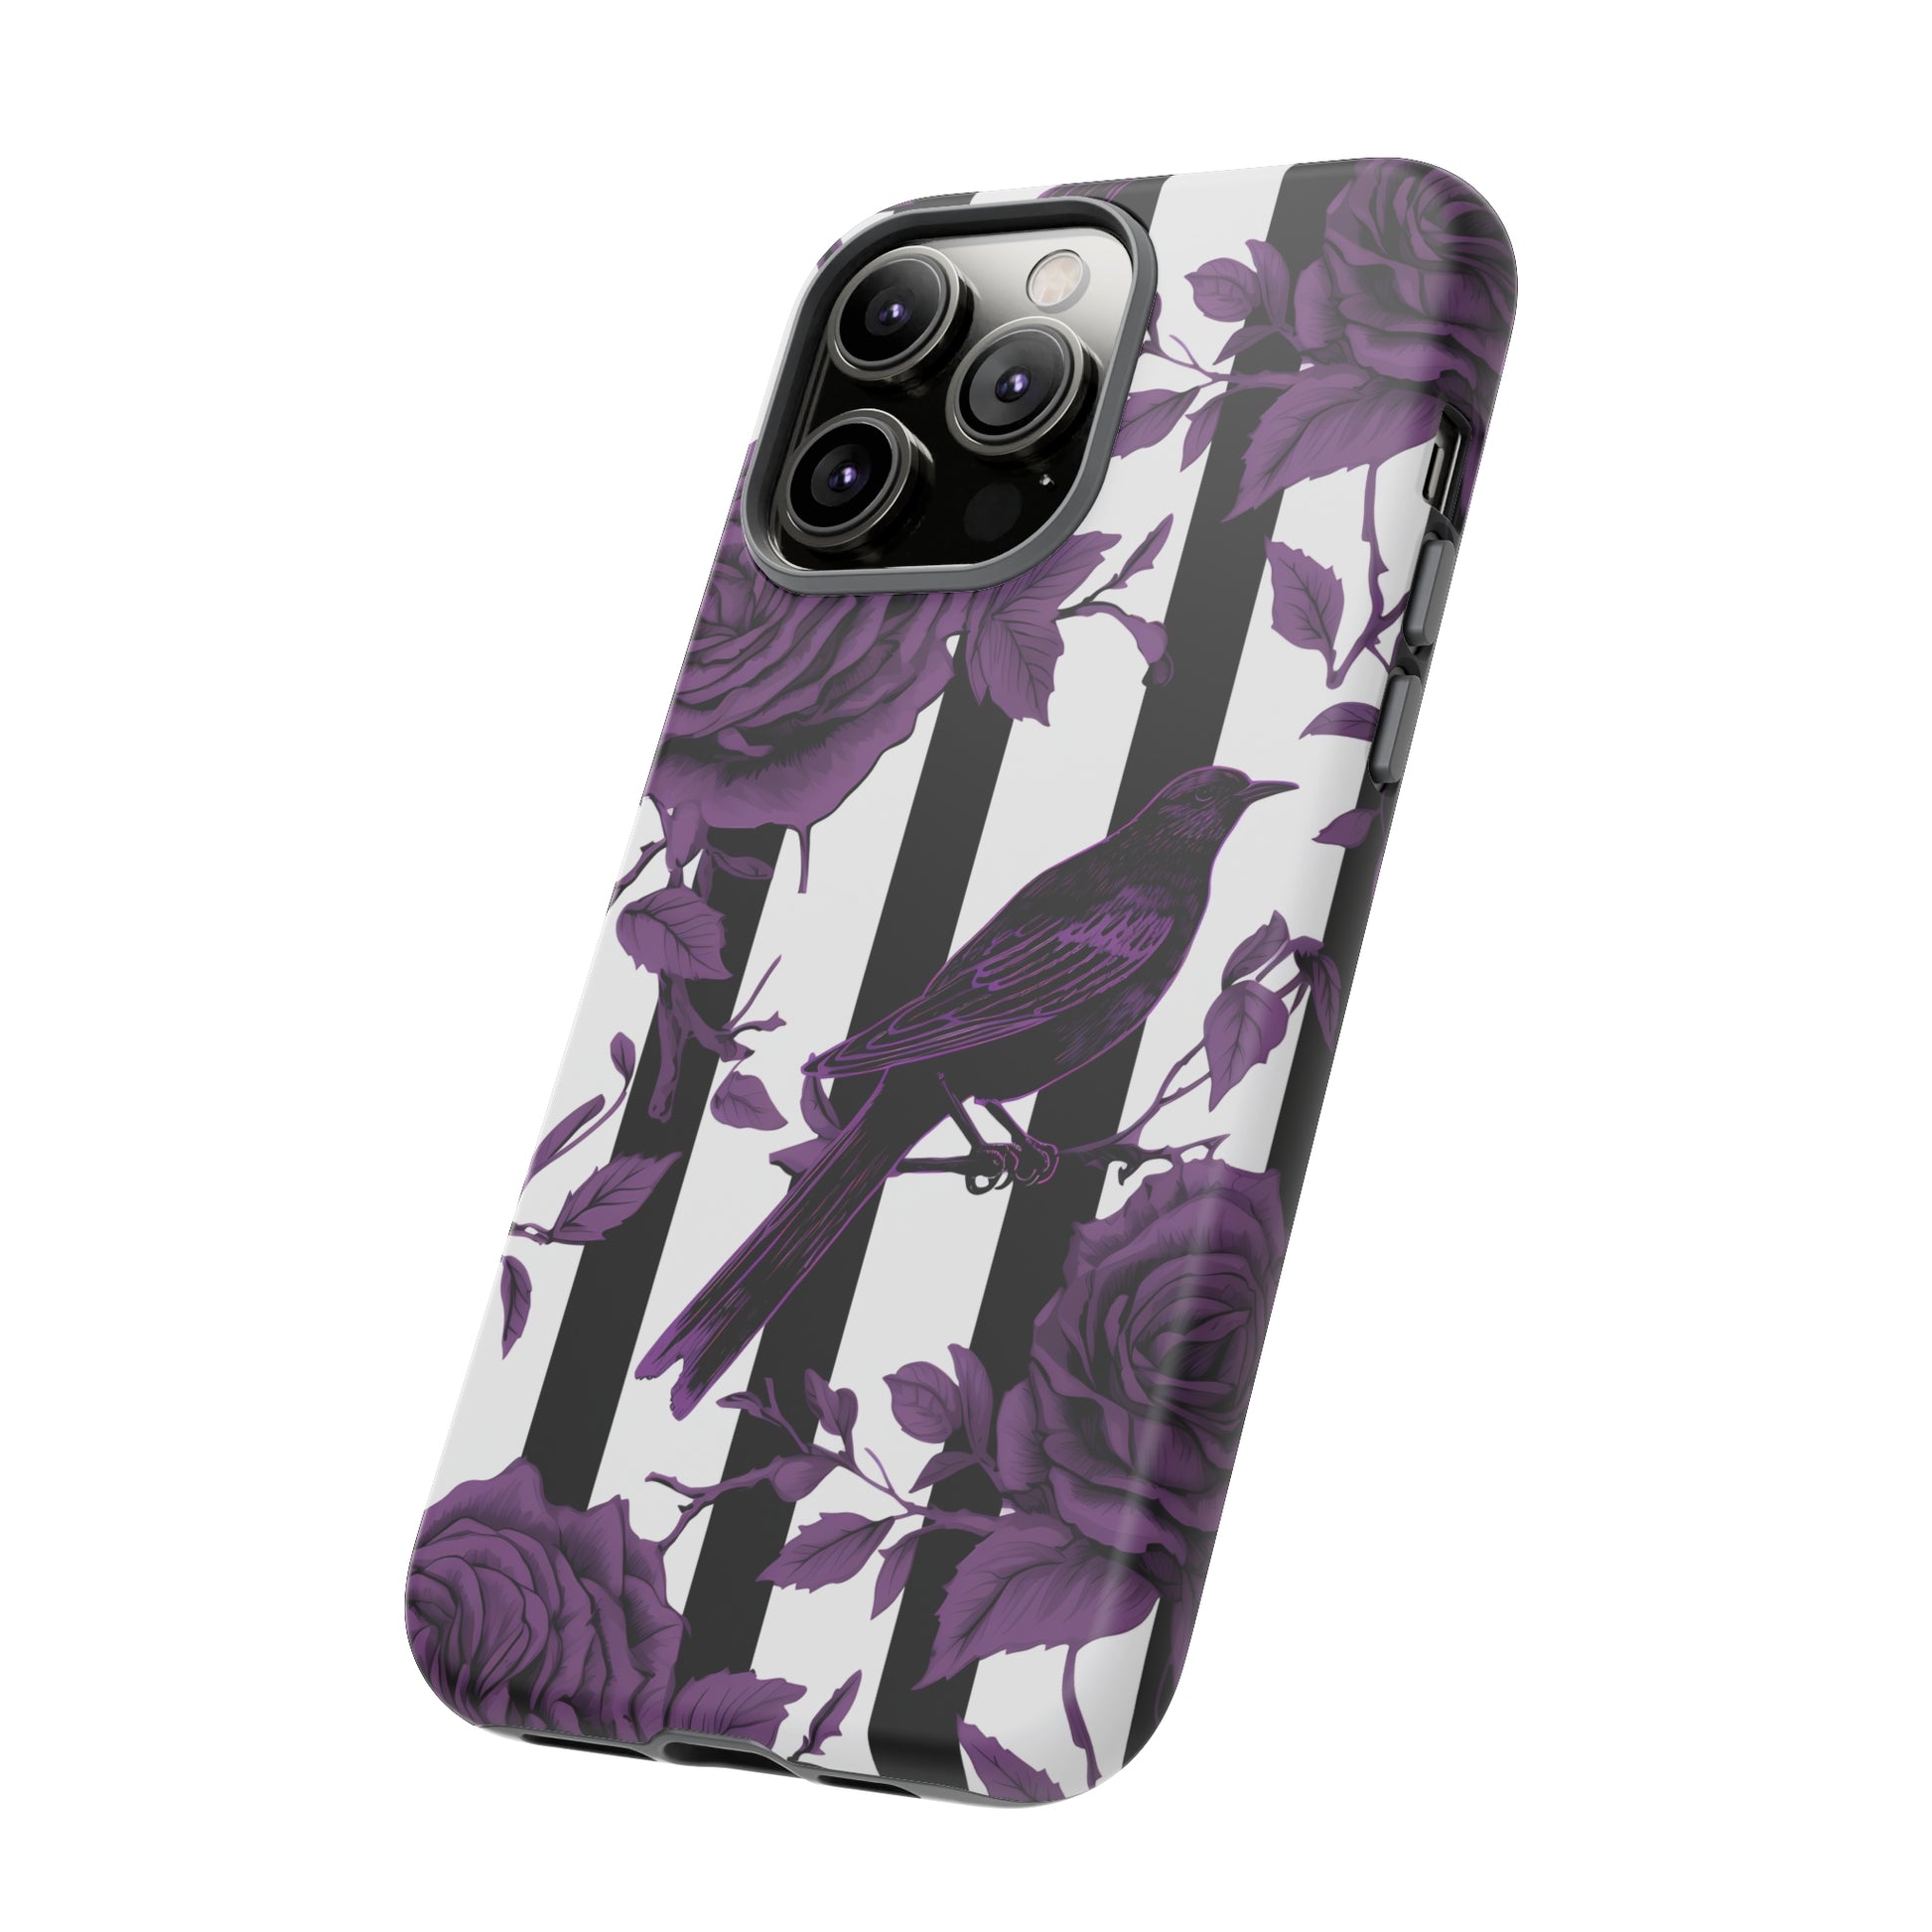 Striped Crows and Roses Tough Cases for iPhone Samsung Google PhonesPhone CaseVTZdesignsGoogle Pixel 5 5GGlossyAccessoriescrowsGlossy